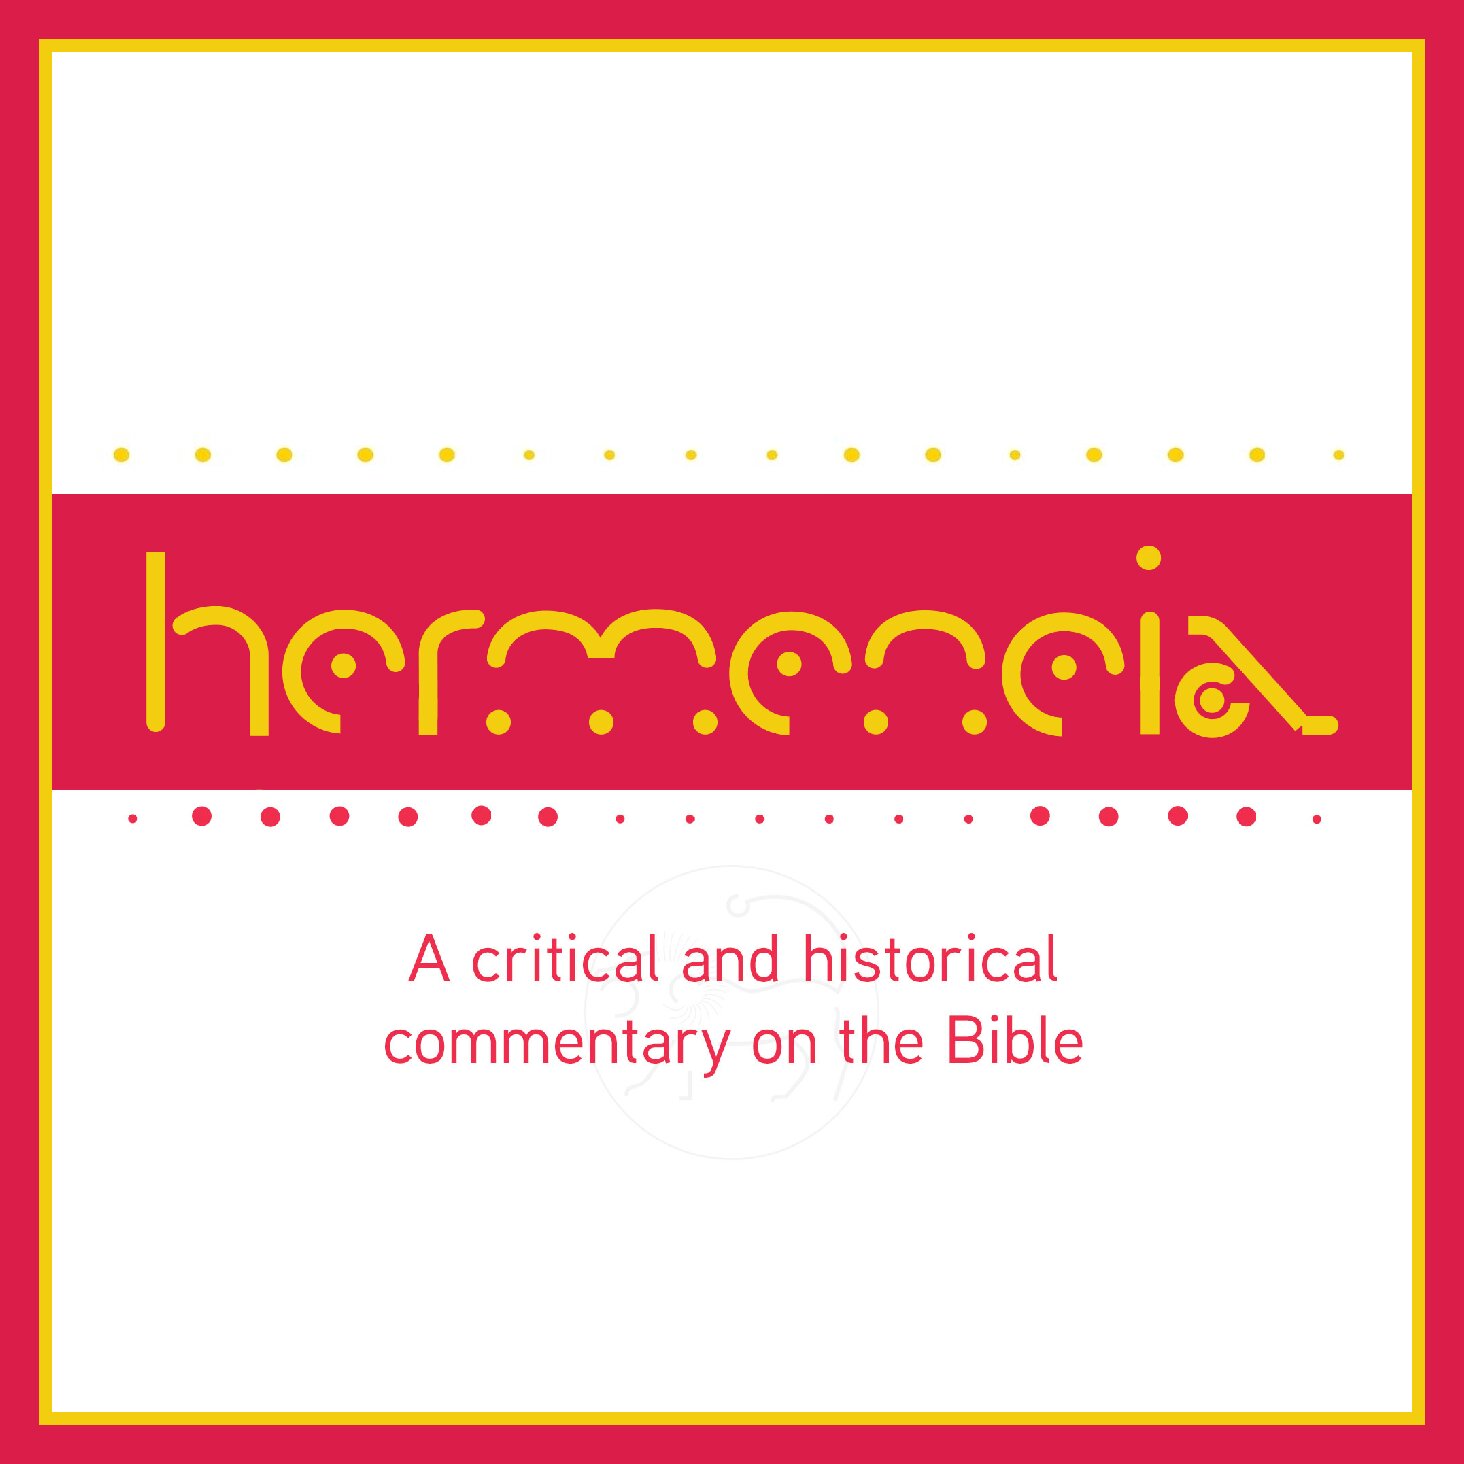 Hermeneia: A Critical and Historical Commentary on the Bible | HERM (55 vols.)